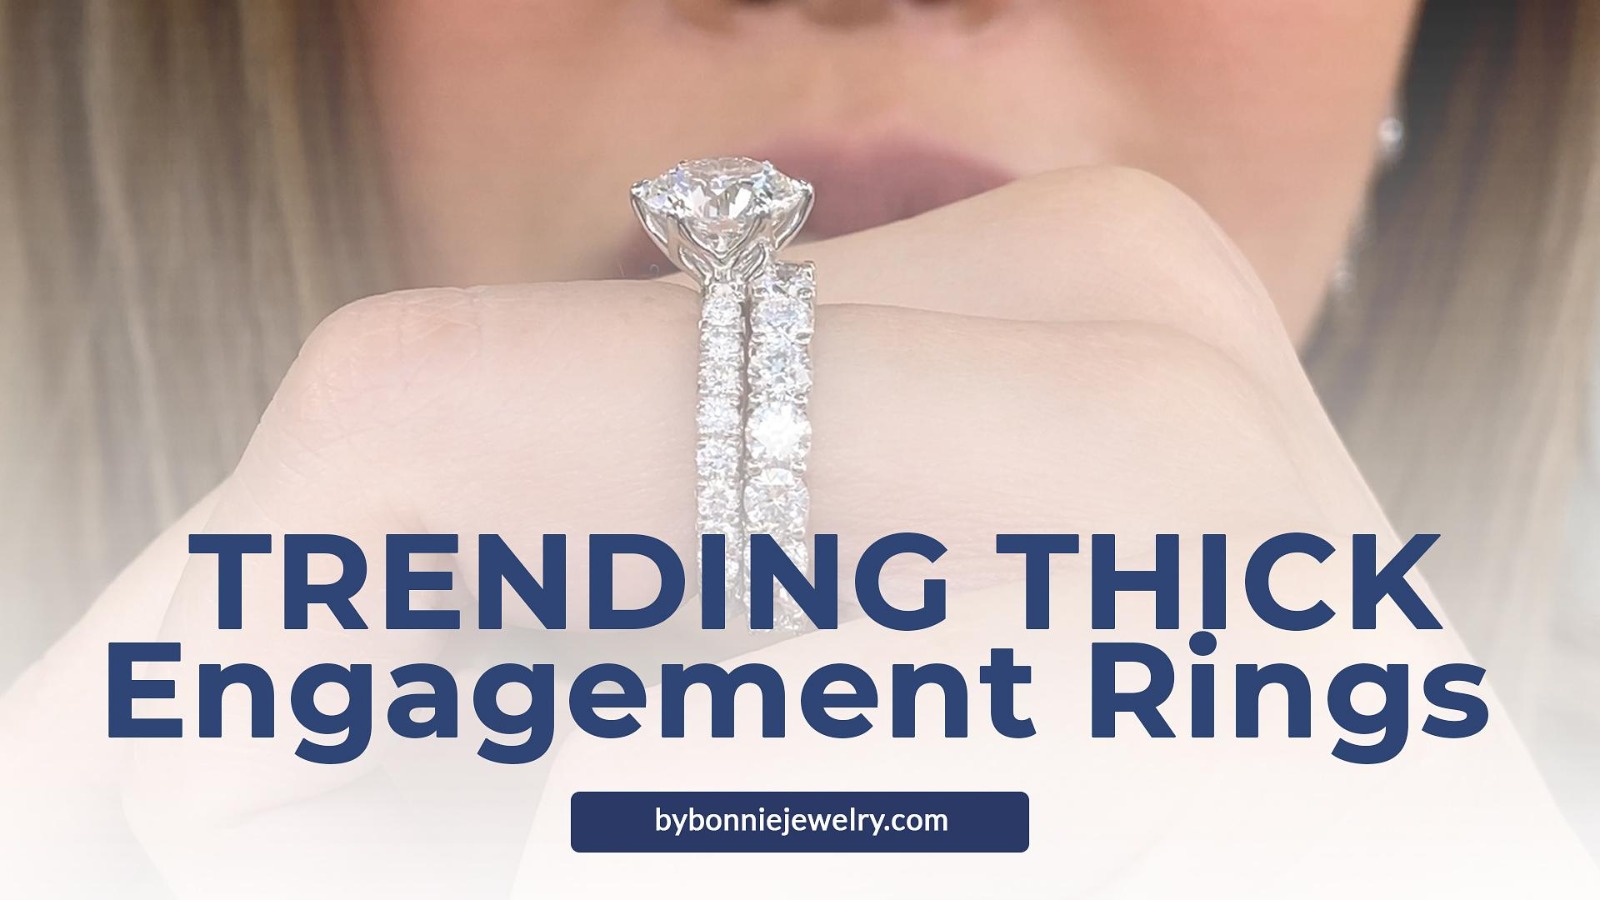 Trending THICK Engagement Rings